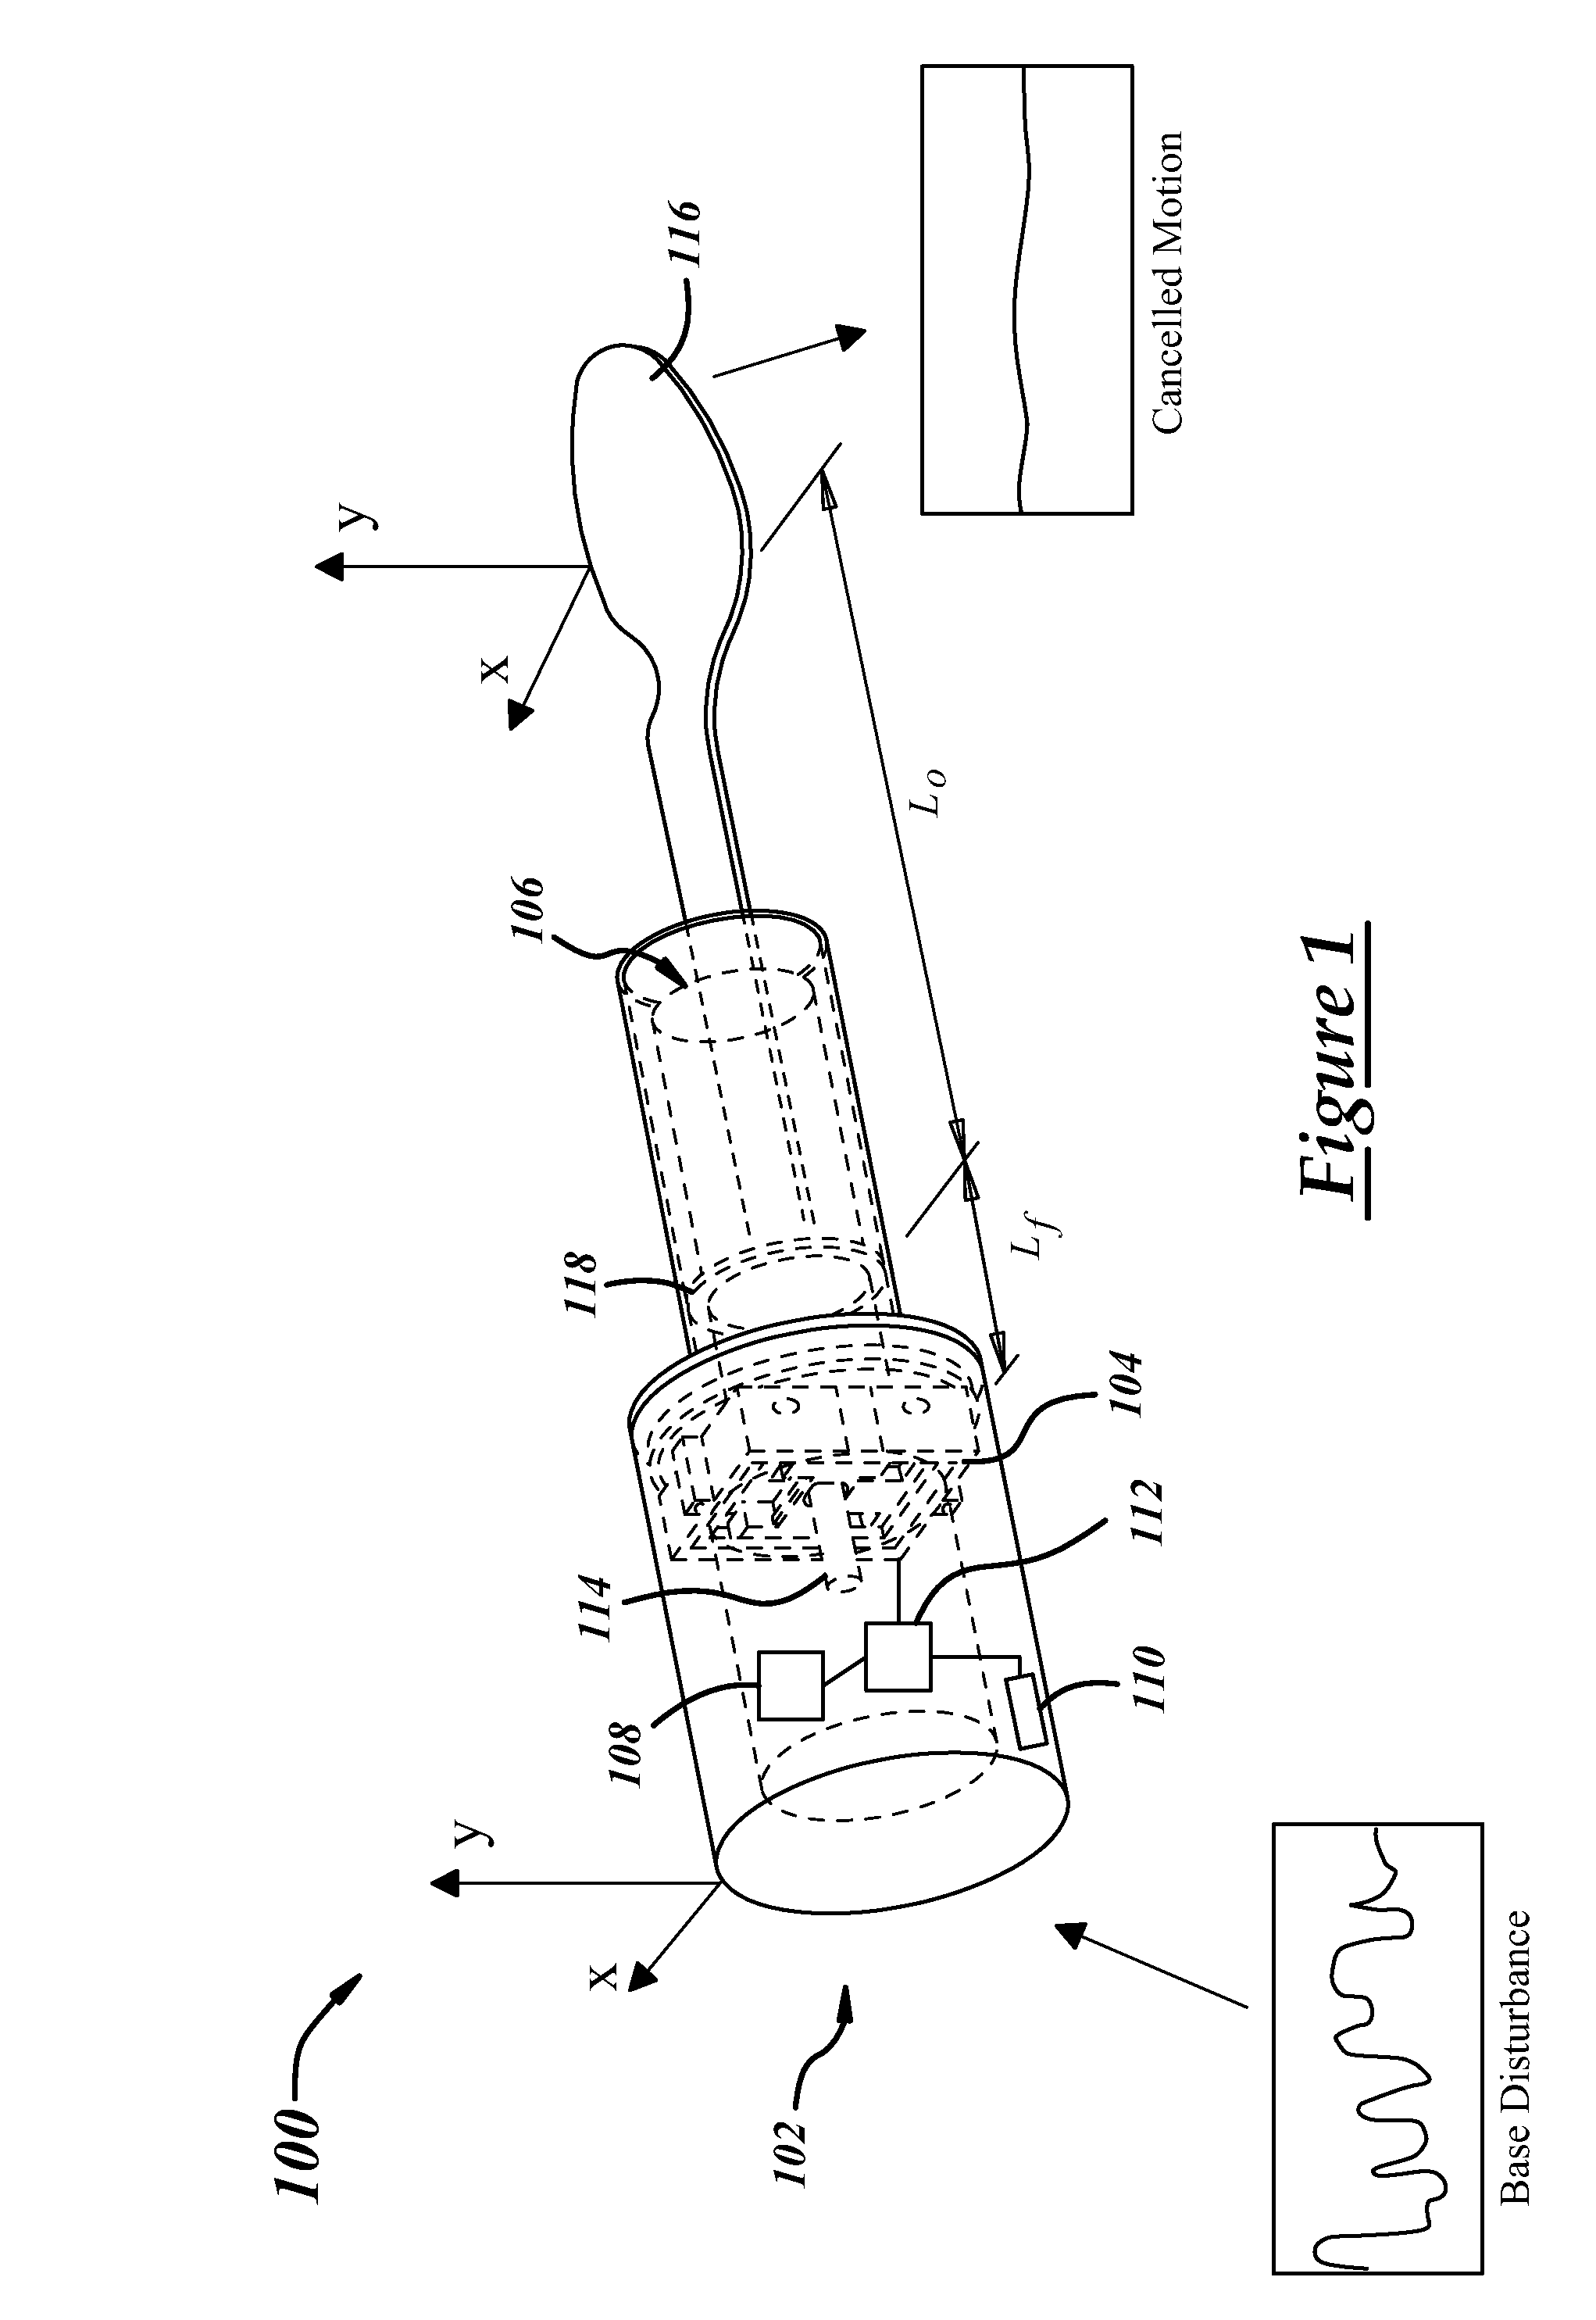 Tremor stabilizing system for handheld devices